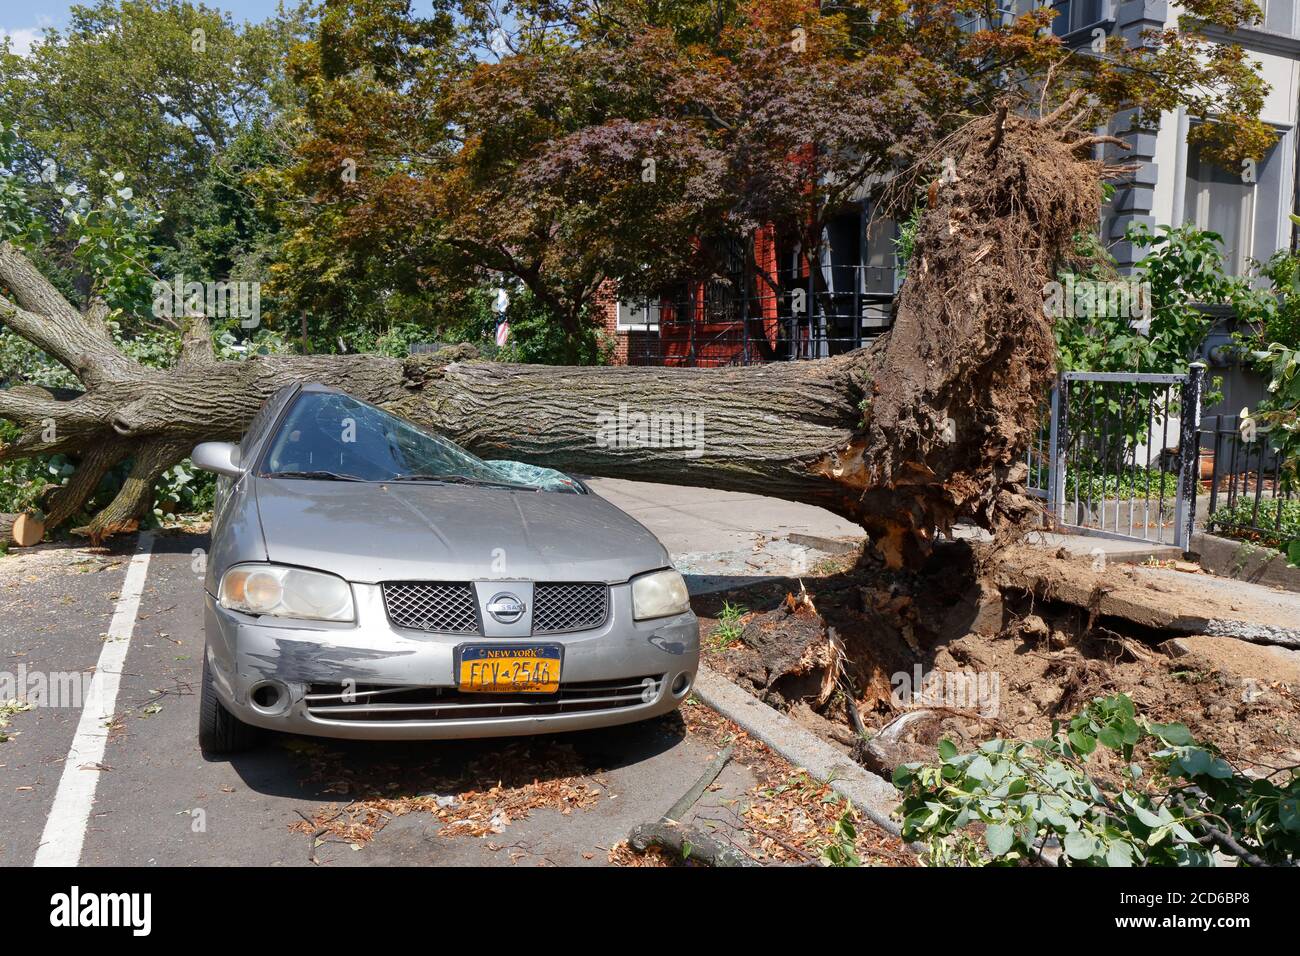 A car damaged by an uprooted tree toppled by strong winds from Tropical Storm Isaias, New York City, August 5, 2020. Stock Photo